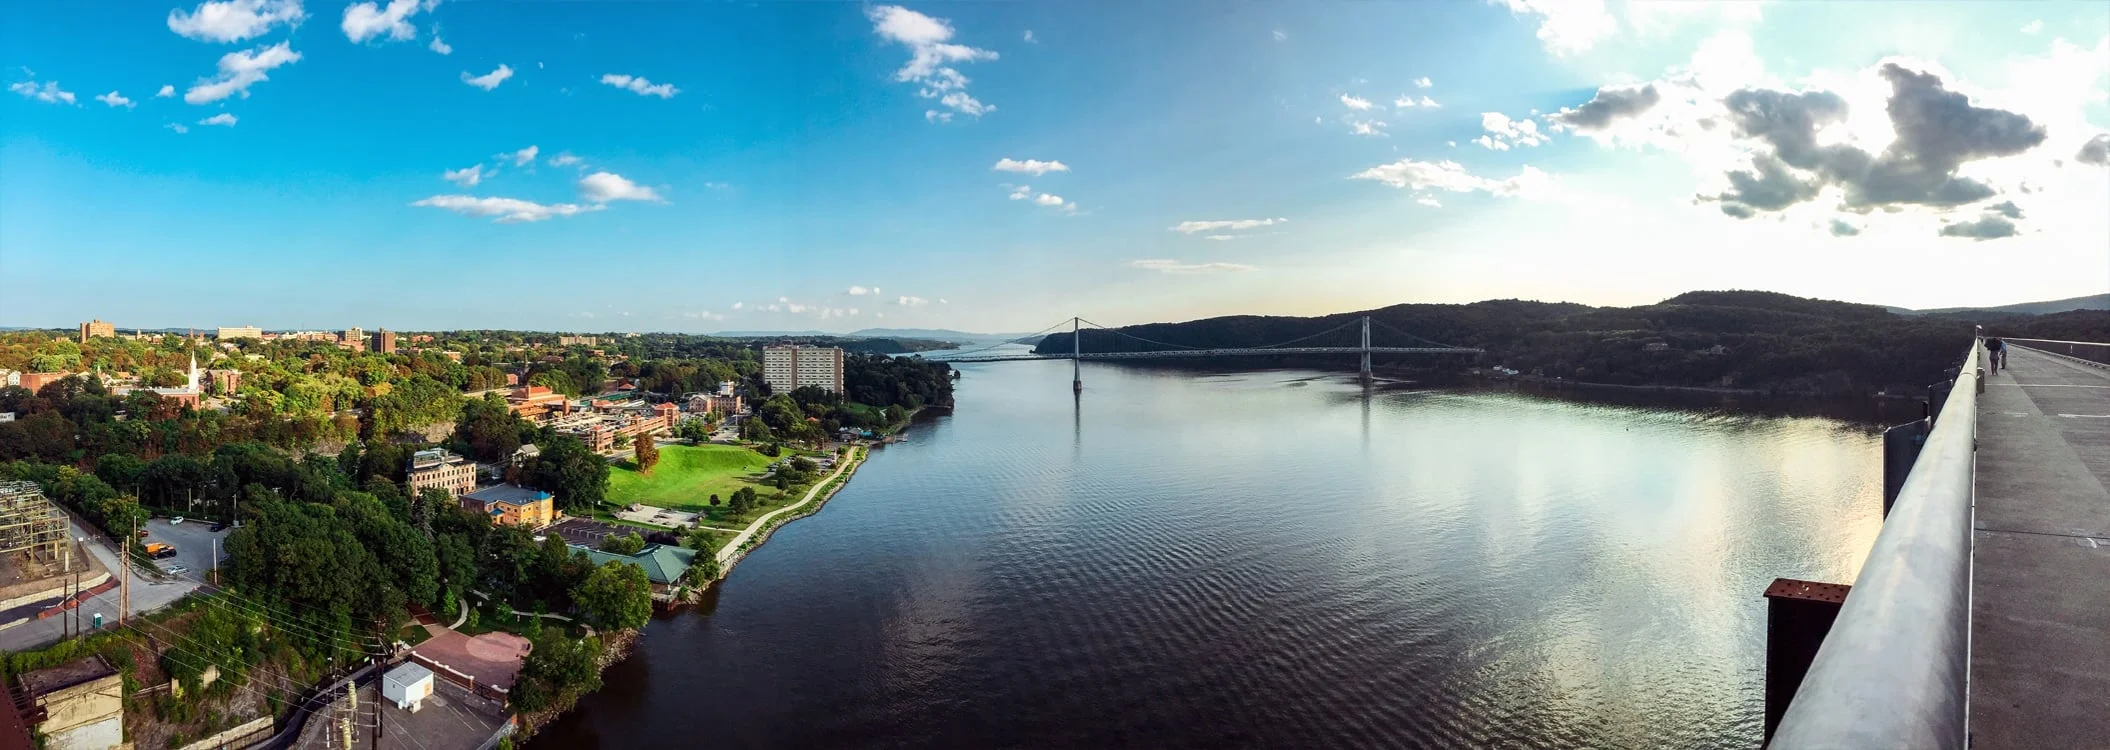 A view of Poughkeepsie, Mid-Hudson Bridge and Highland from Walkway Over the Hudson. | Photo by Andrew Frey